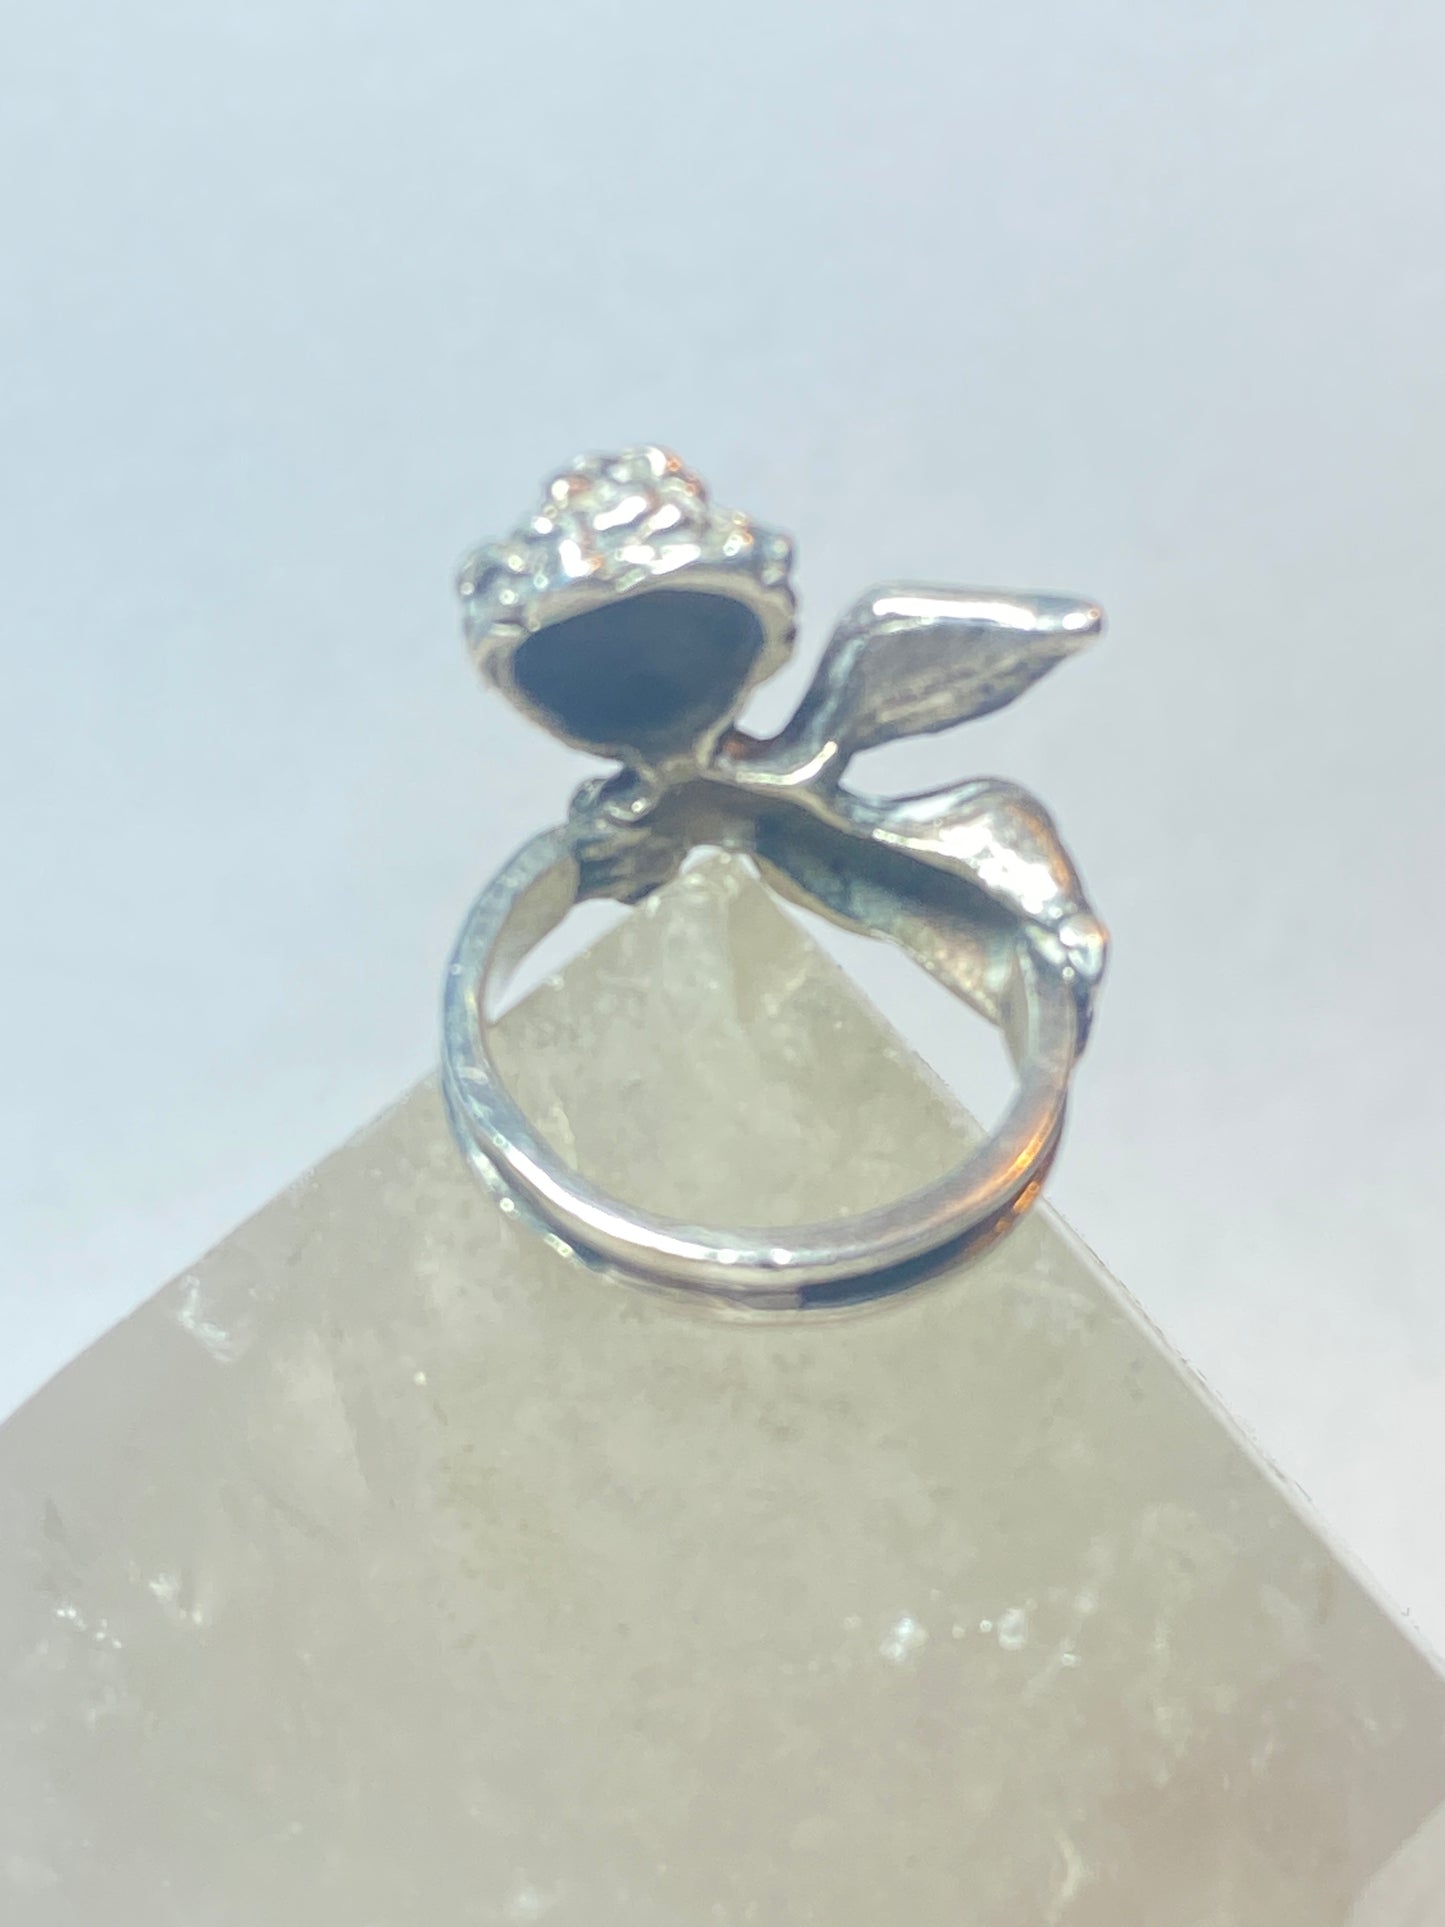 Winged Cupid ring heart valentine band sterling silver women girls